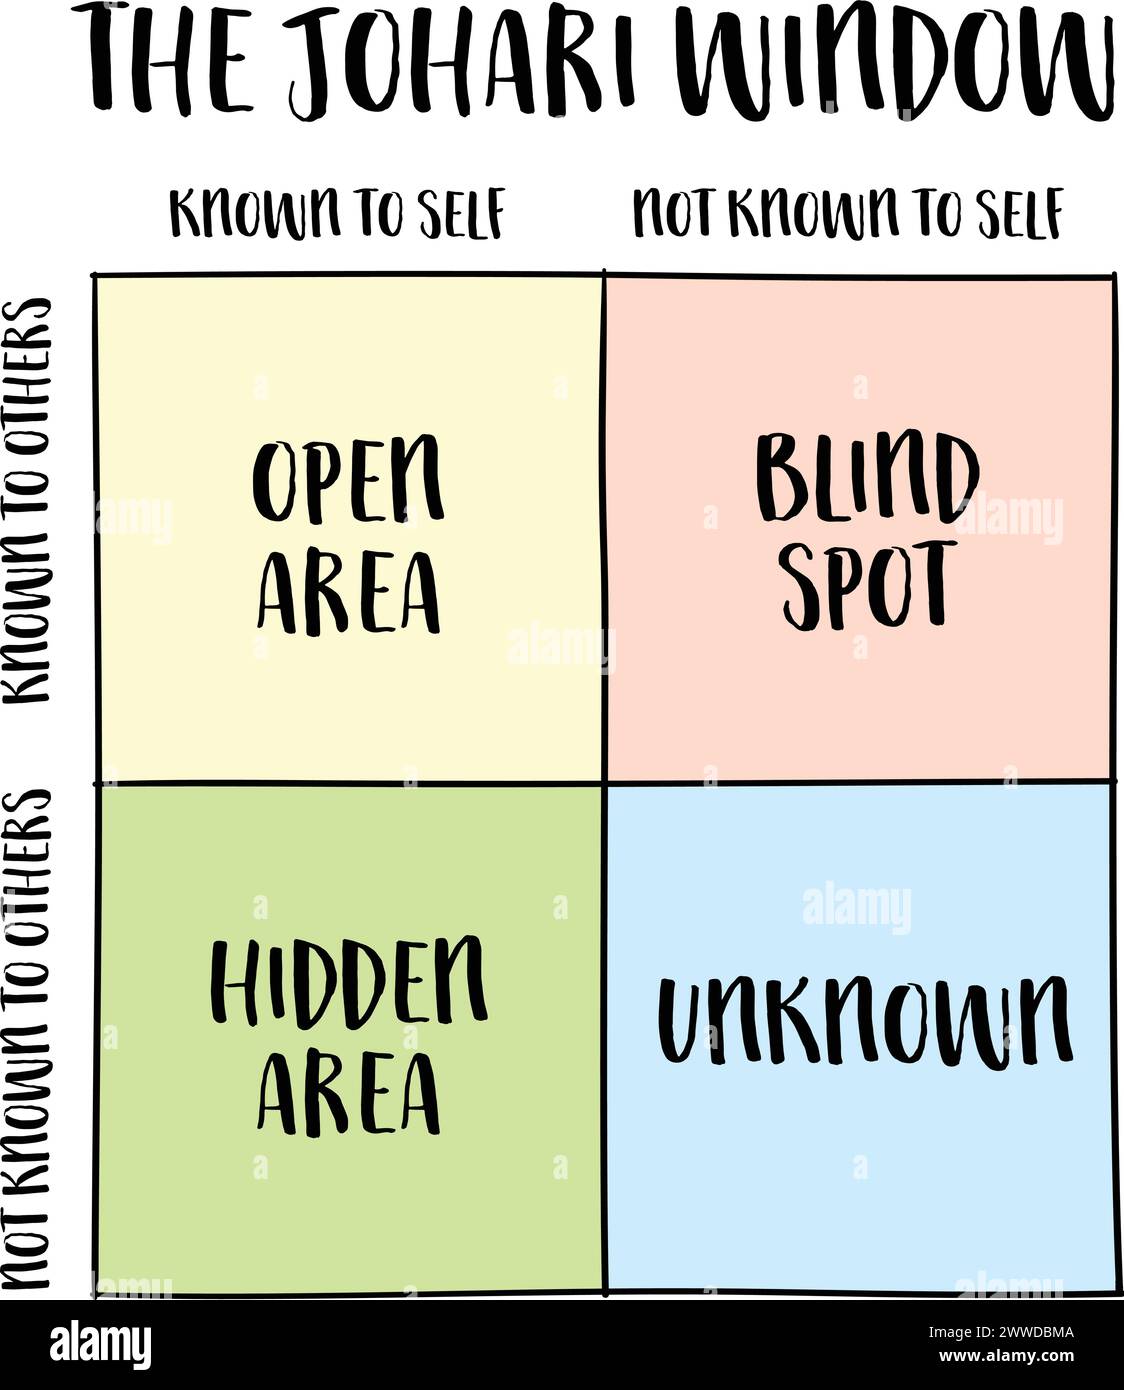 the Johari window model, a framework for understanding the relationships between self-awareness and interpersonal communication with four quadrants of Stock Vector